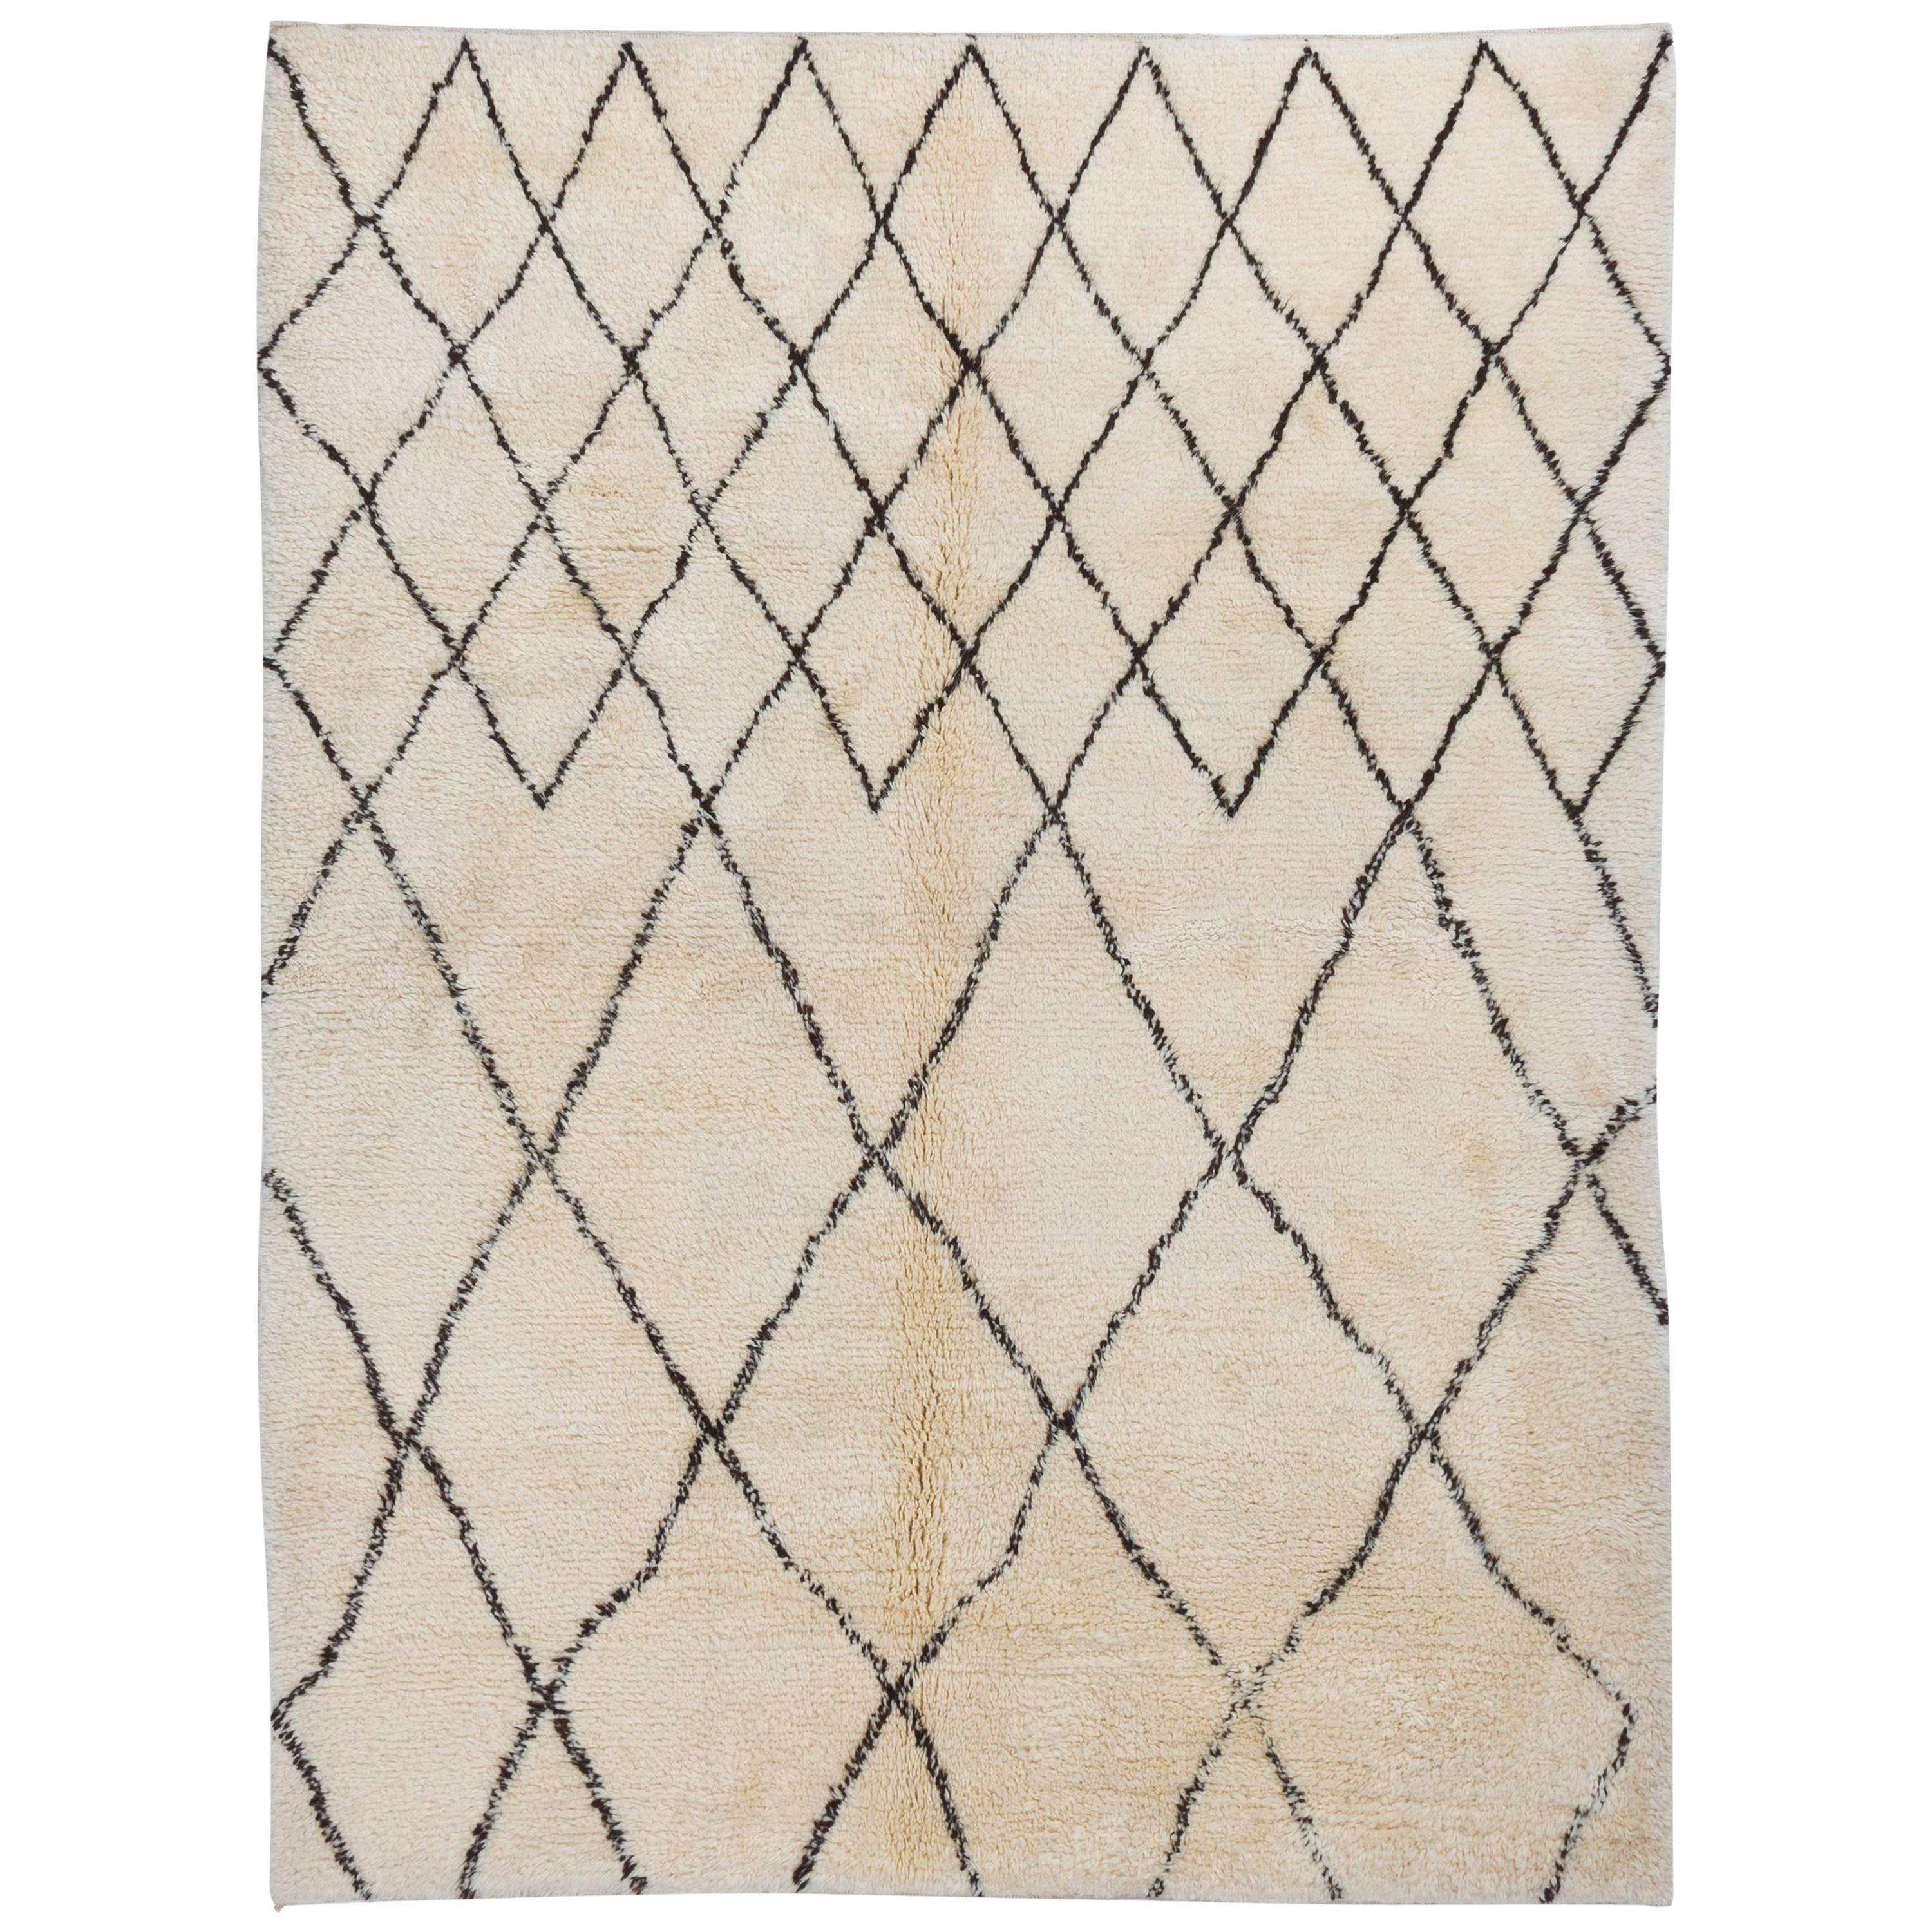 Beni Ourain Moroccan Tulu Rug Made of All Natural Wool. CUSTOM OPTIONS Available